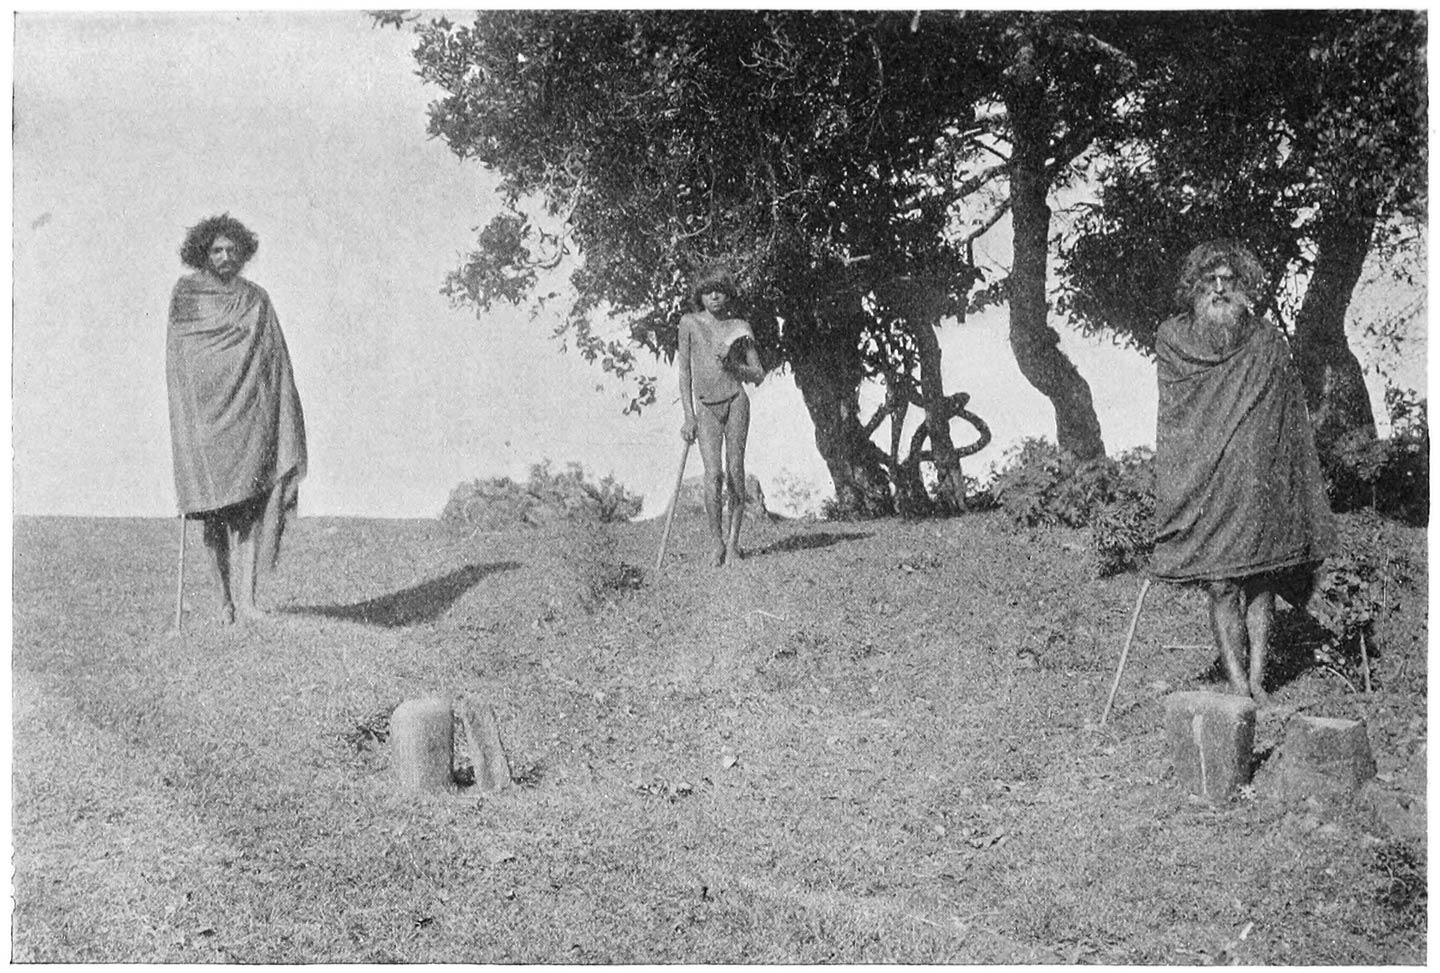 FIG. 33.—THE FOUR ‘NEURZÜLNKARS’ AT MÒDR. BEHIND THE STONES ON THE RIGHT IS KARKIEVAN, THE ‘PALOL’ OF THE ‘TIIR’; ON THE LEFT IS NERPONERS, THE ‘PALOL’ OF THE ‘WARSIR’; IN THE CENTRE IS THE ‘KALTMOKH,’ KATSOG, CARRYING A SICKLE-SHAPED KNIFE.